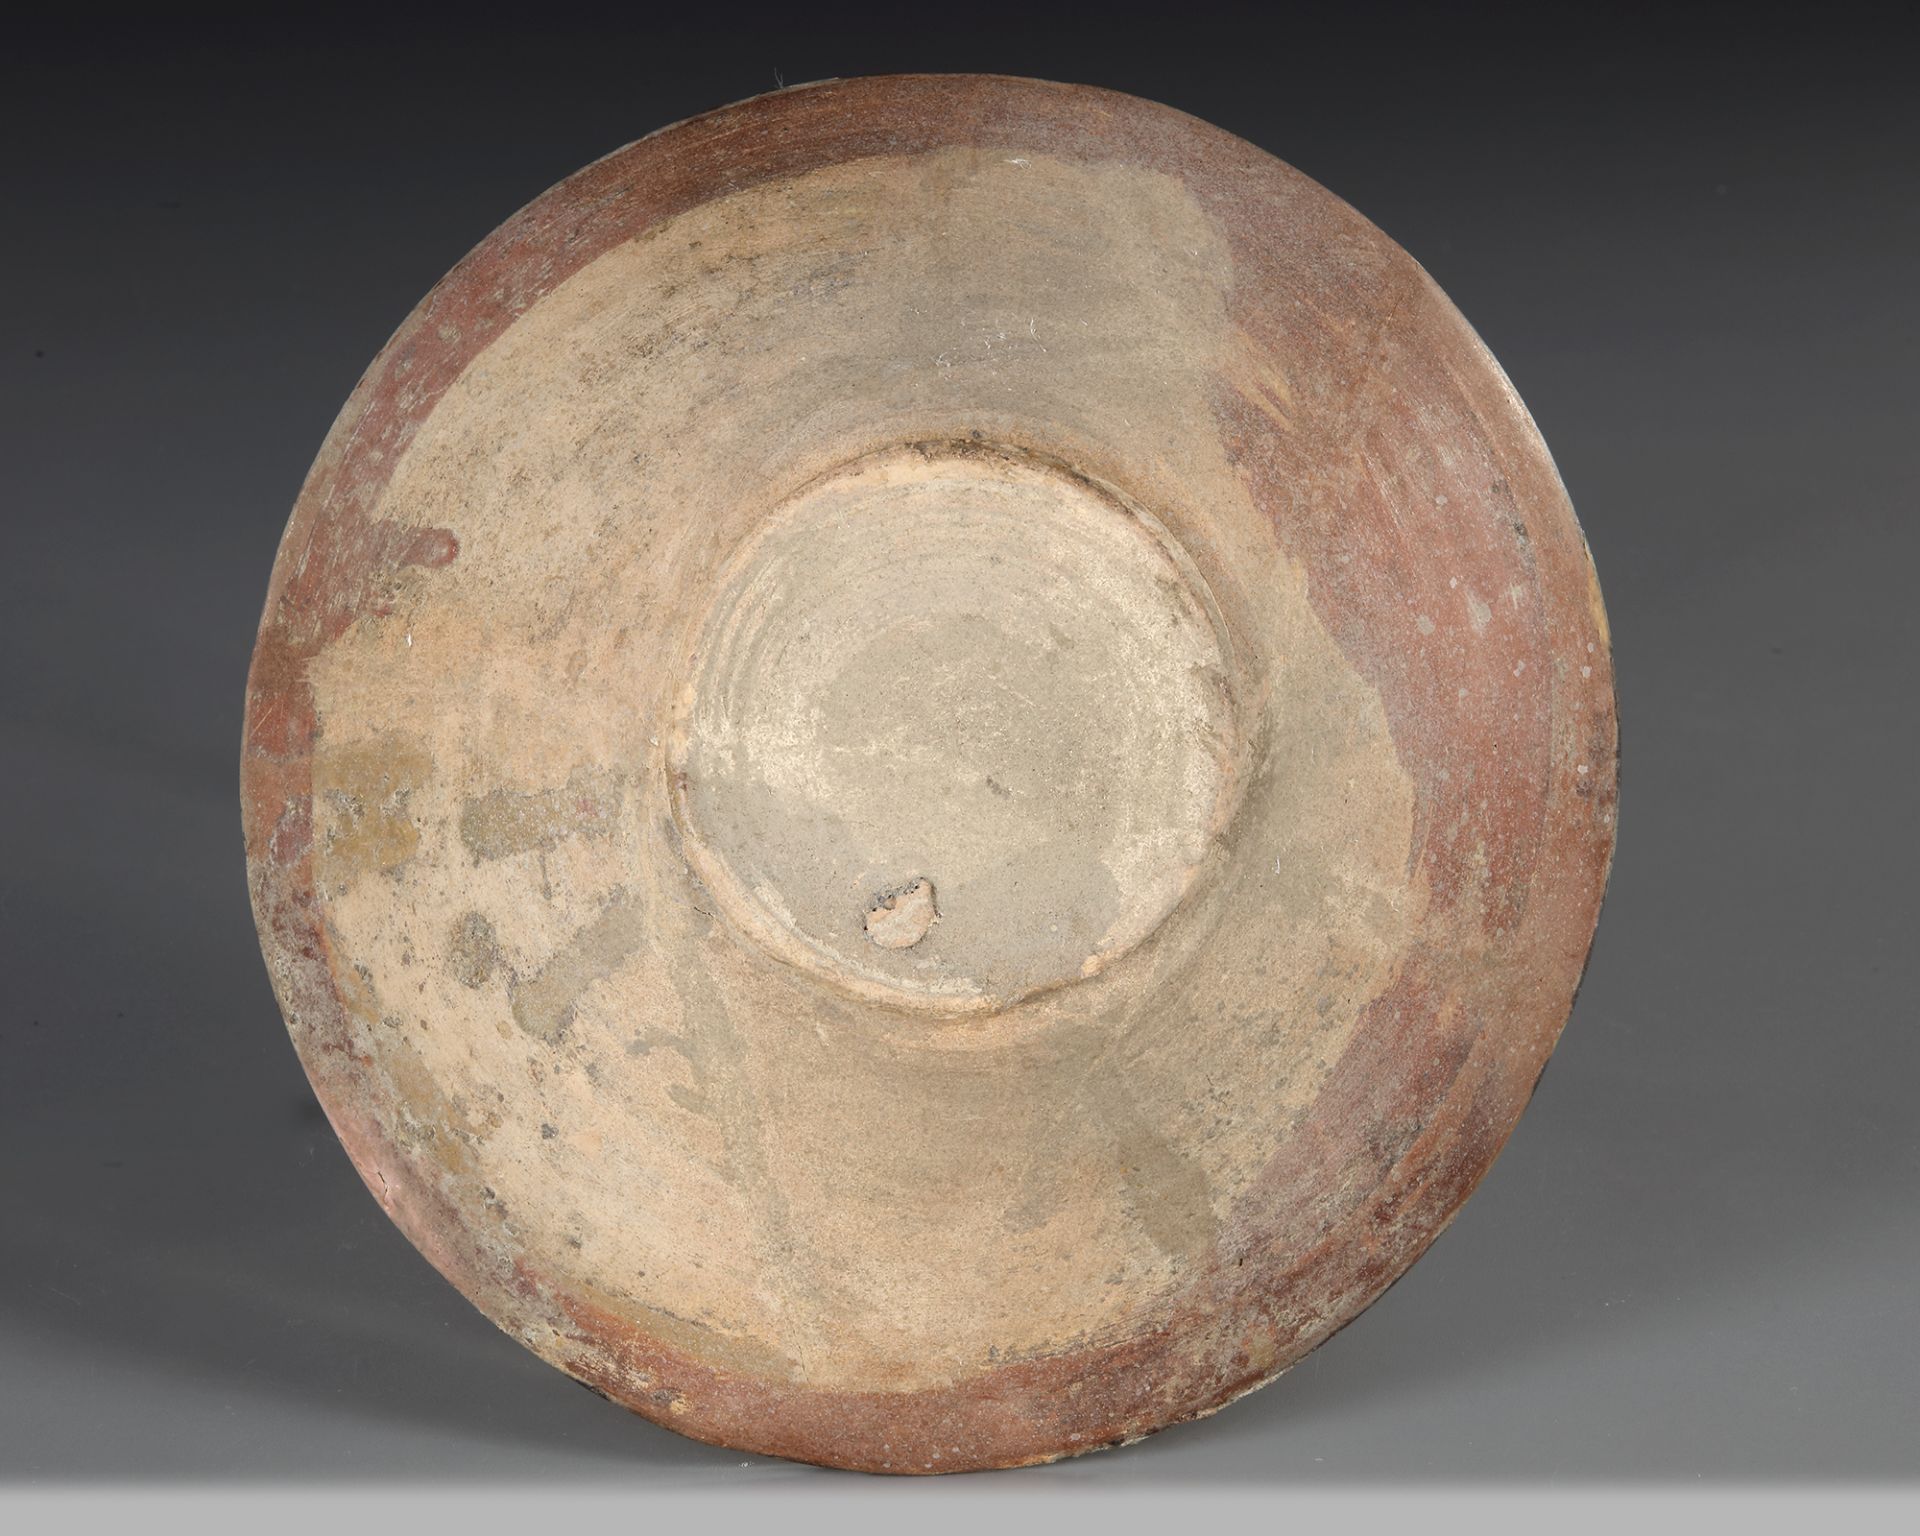 A NISHAPUR CONICAL POTTERY BOWL, PERSIA, 10TH CENTURY - Image 9 of 10